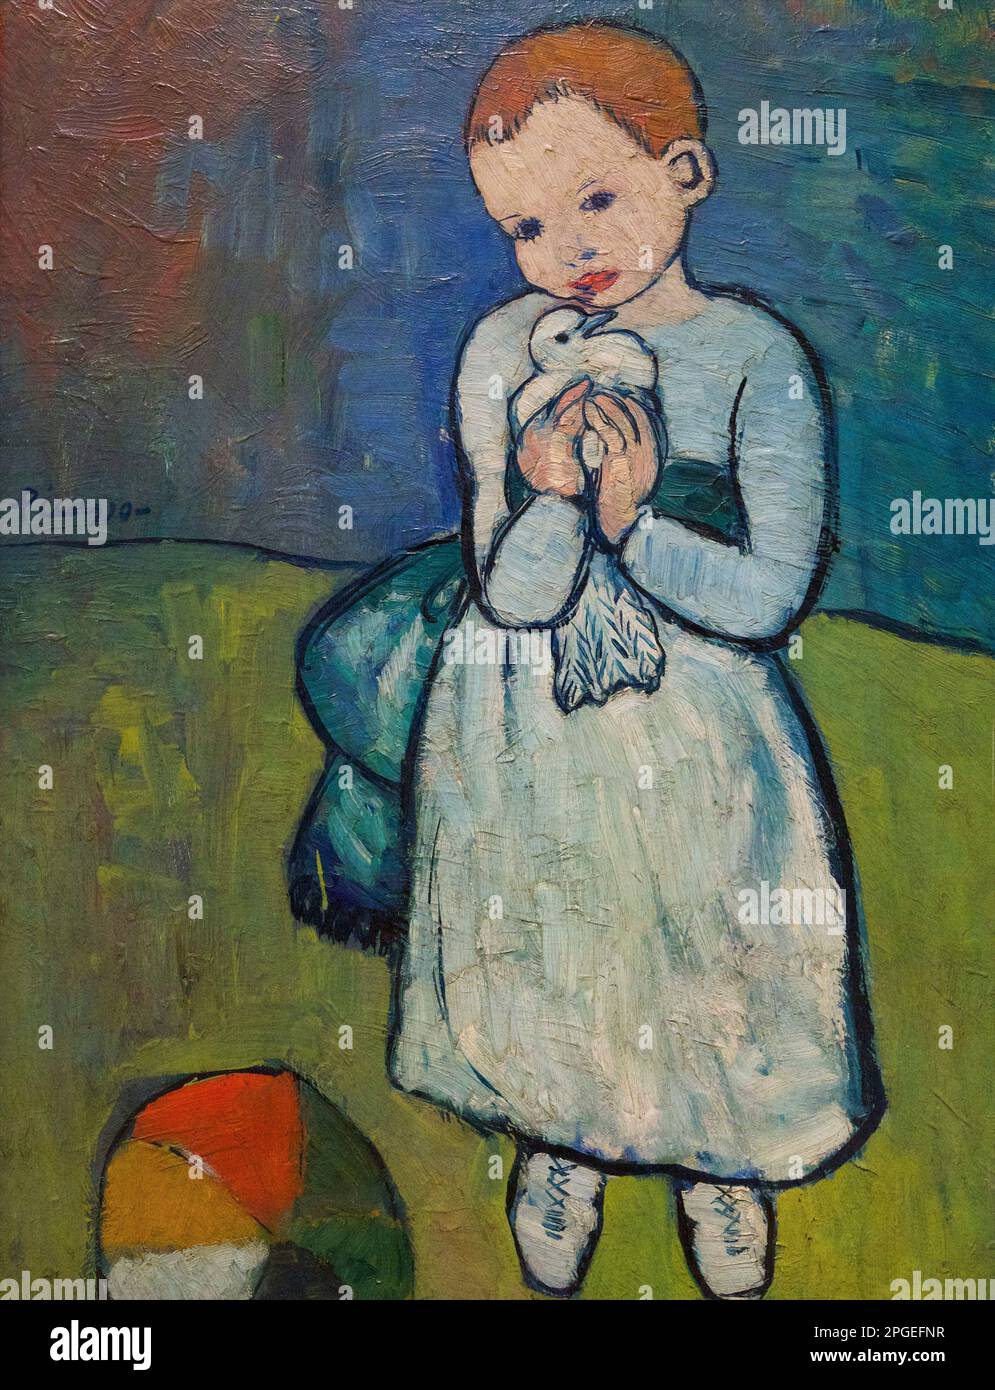 Child with a Dove, Pablo Picasso, 1901, Courtauld Gallery, London, England, UK, Stock Photo